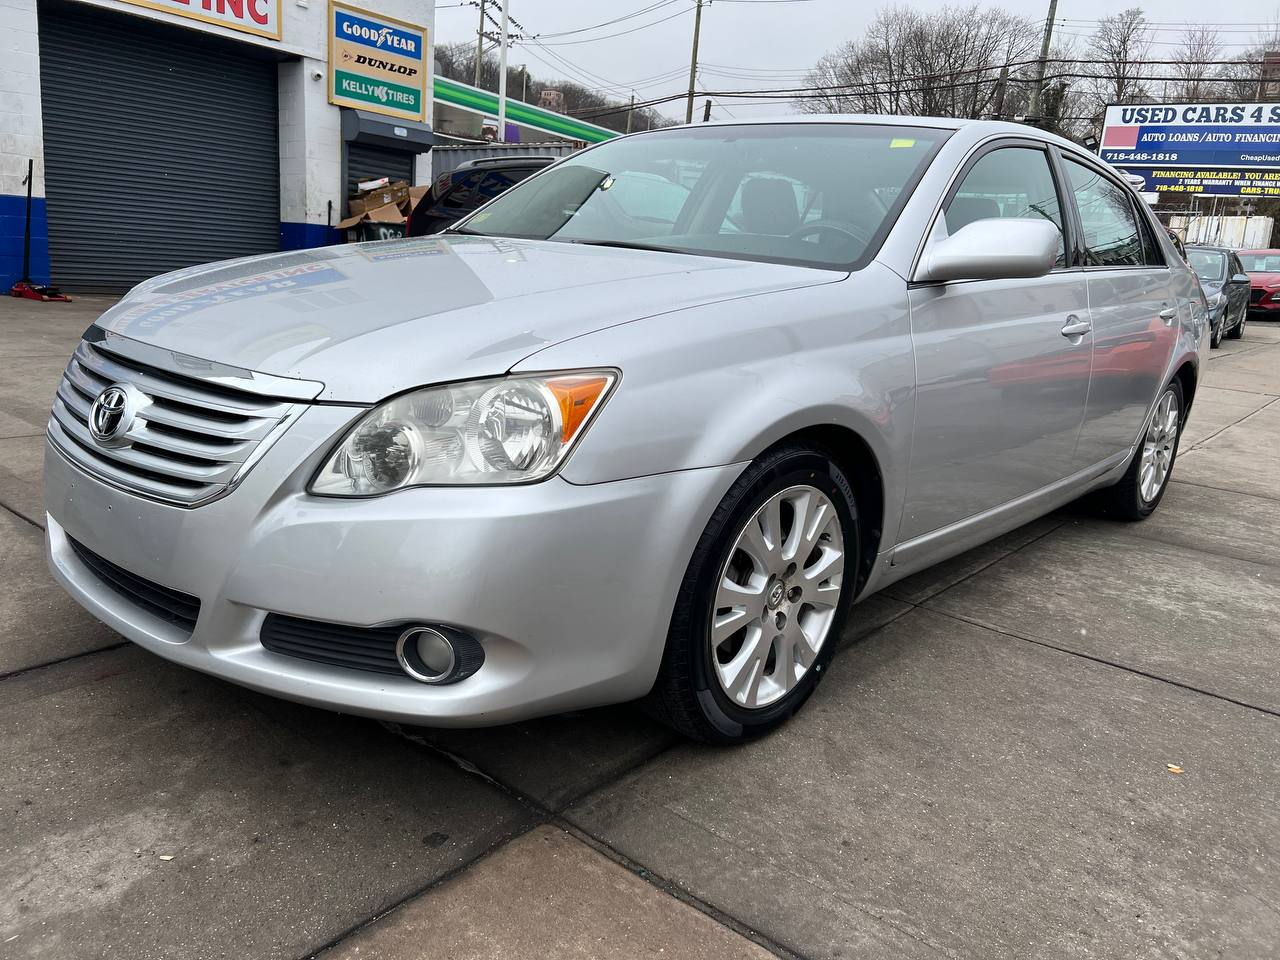 Used Car - 2009 Toyota Avalon XLS for Sale in Brooklyn, NY